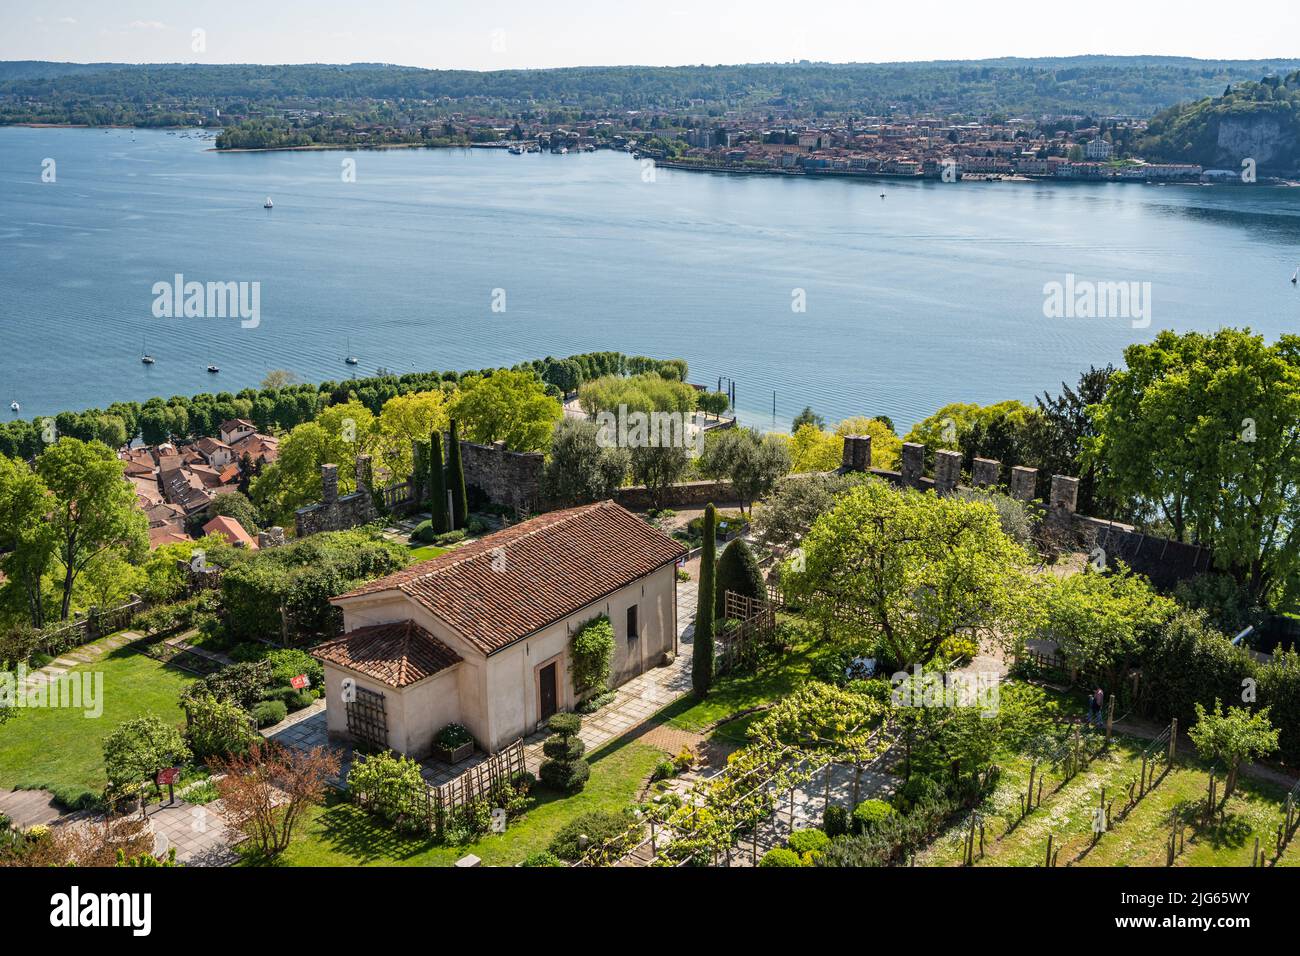 The gardens of the Rocca di Angera and the Lake Maggiore viewed from the tower, Angera, Lombardy, Italy Stock Photo